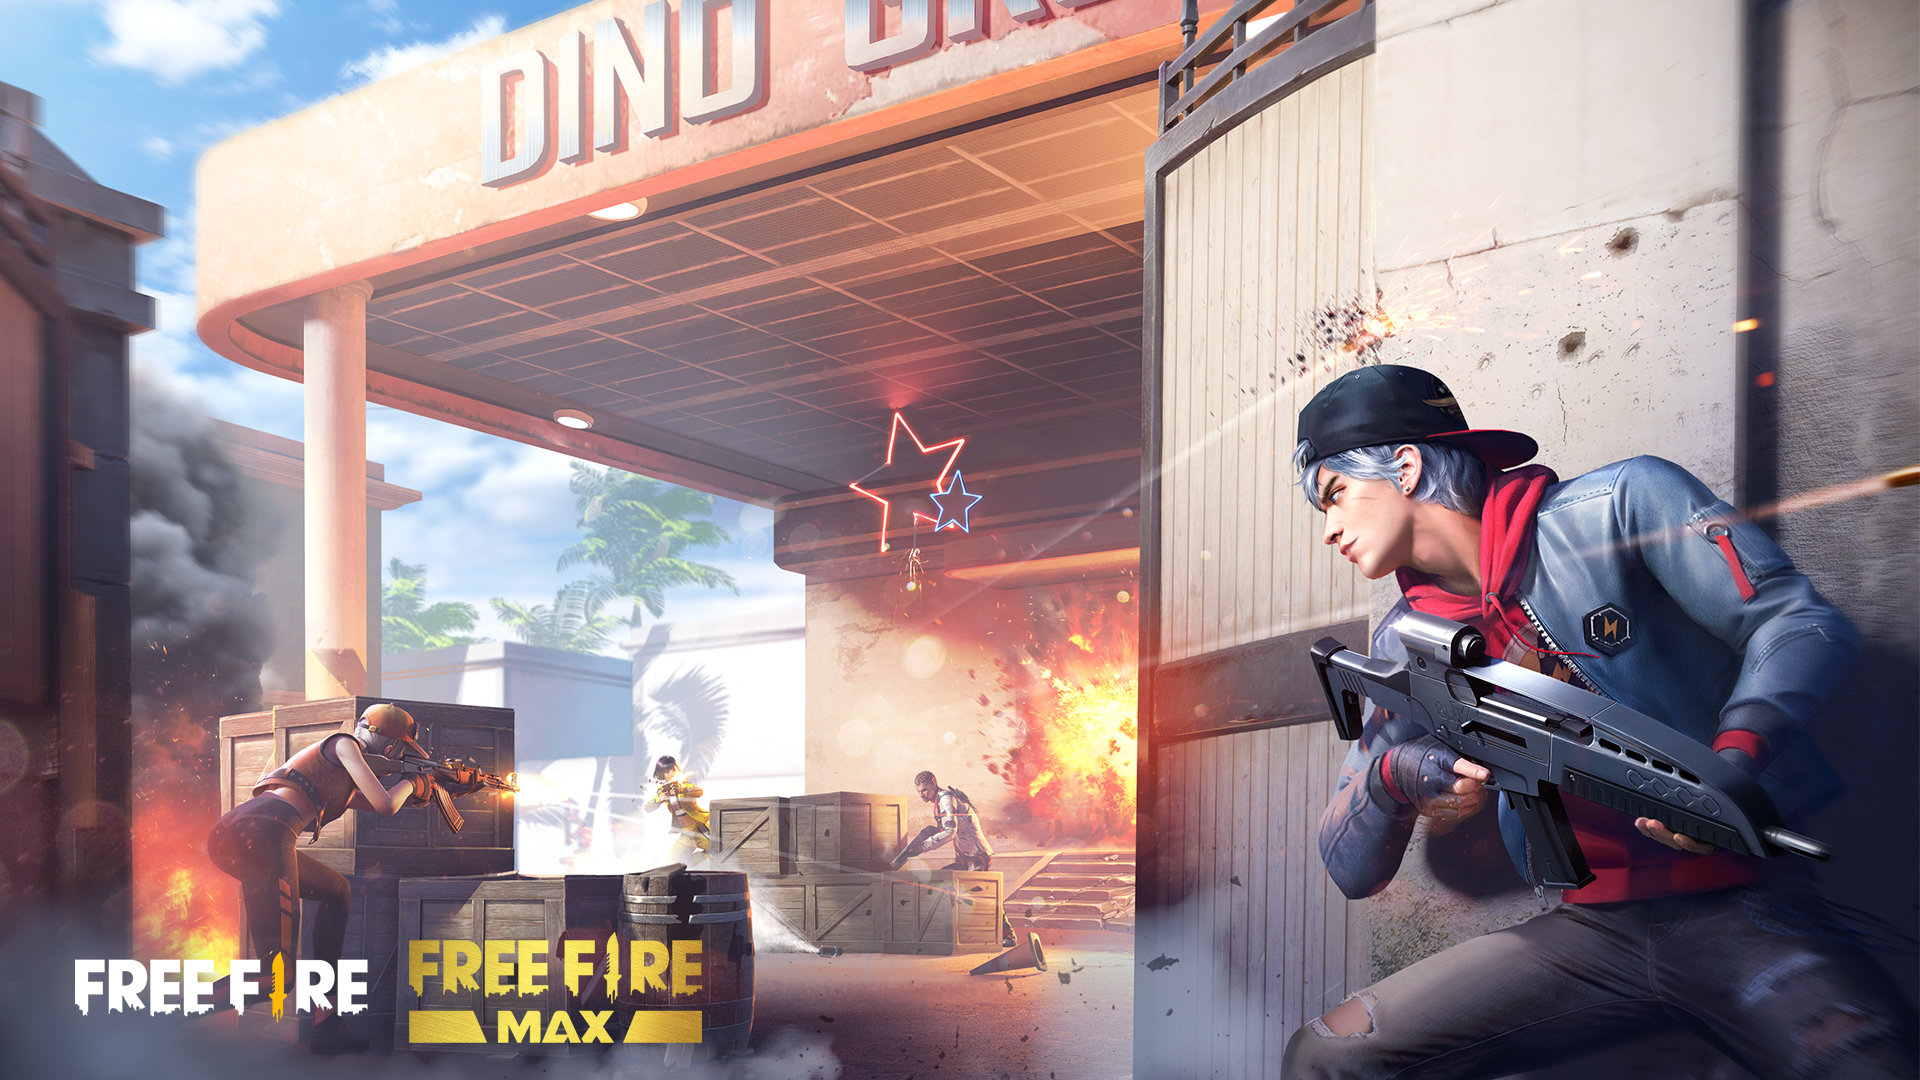 How Garena Free Fire Is Fighting To Stay Popular Among Its Fellow Battle Royale Goliaths